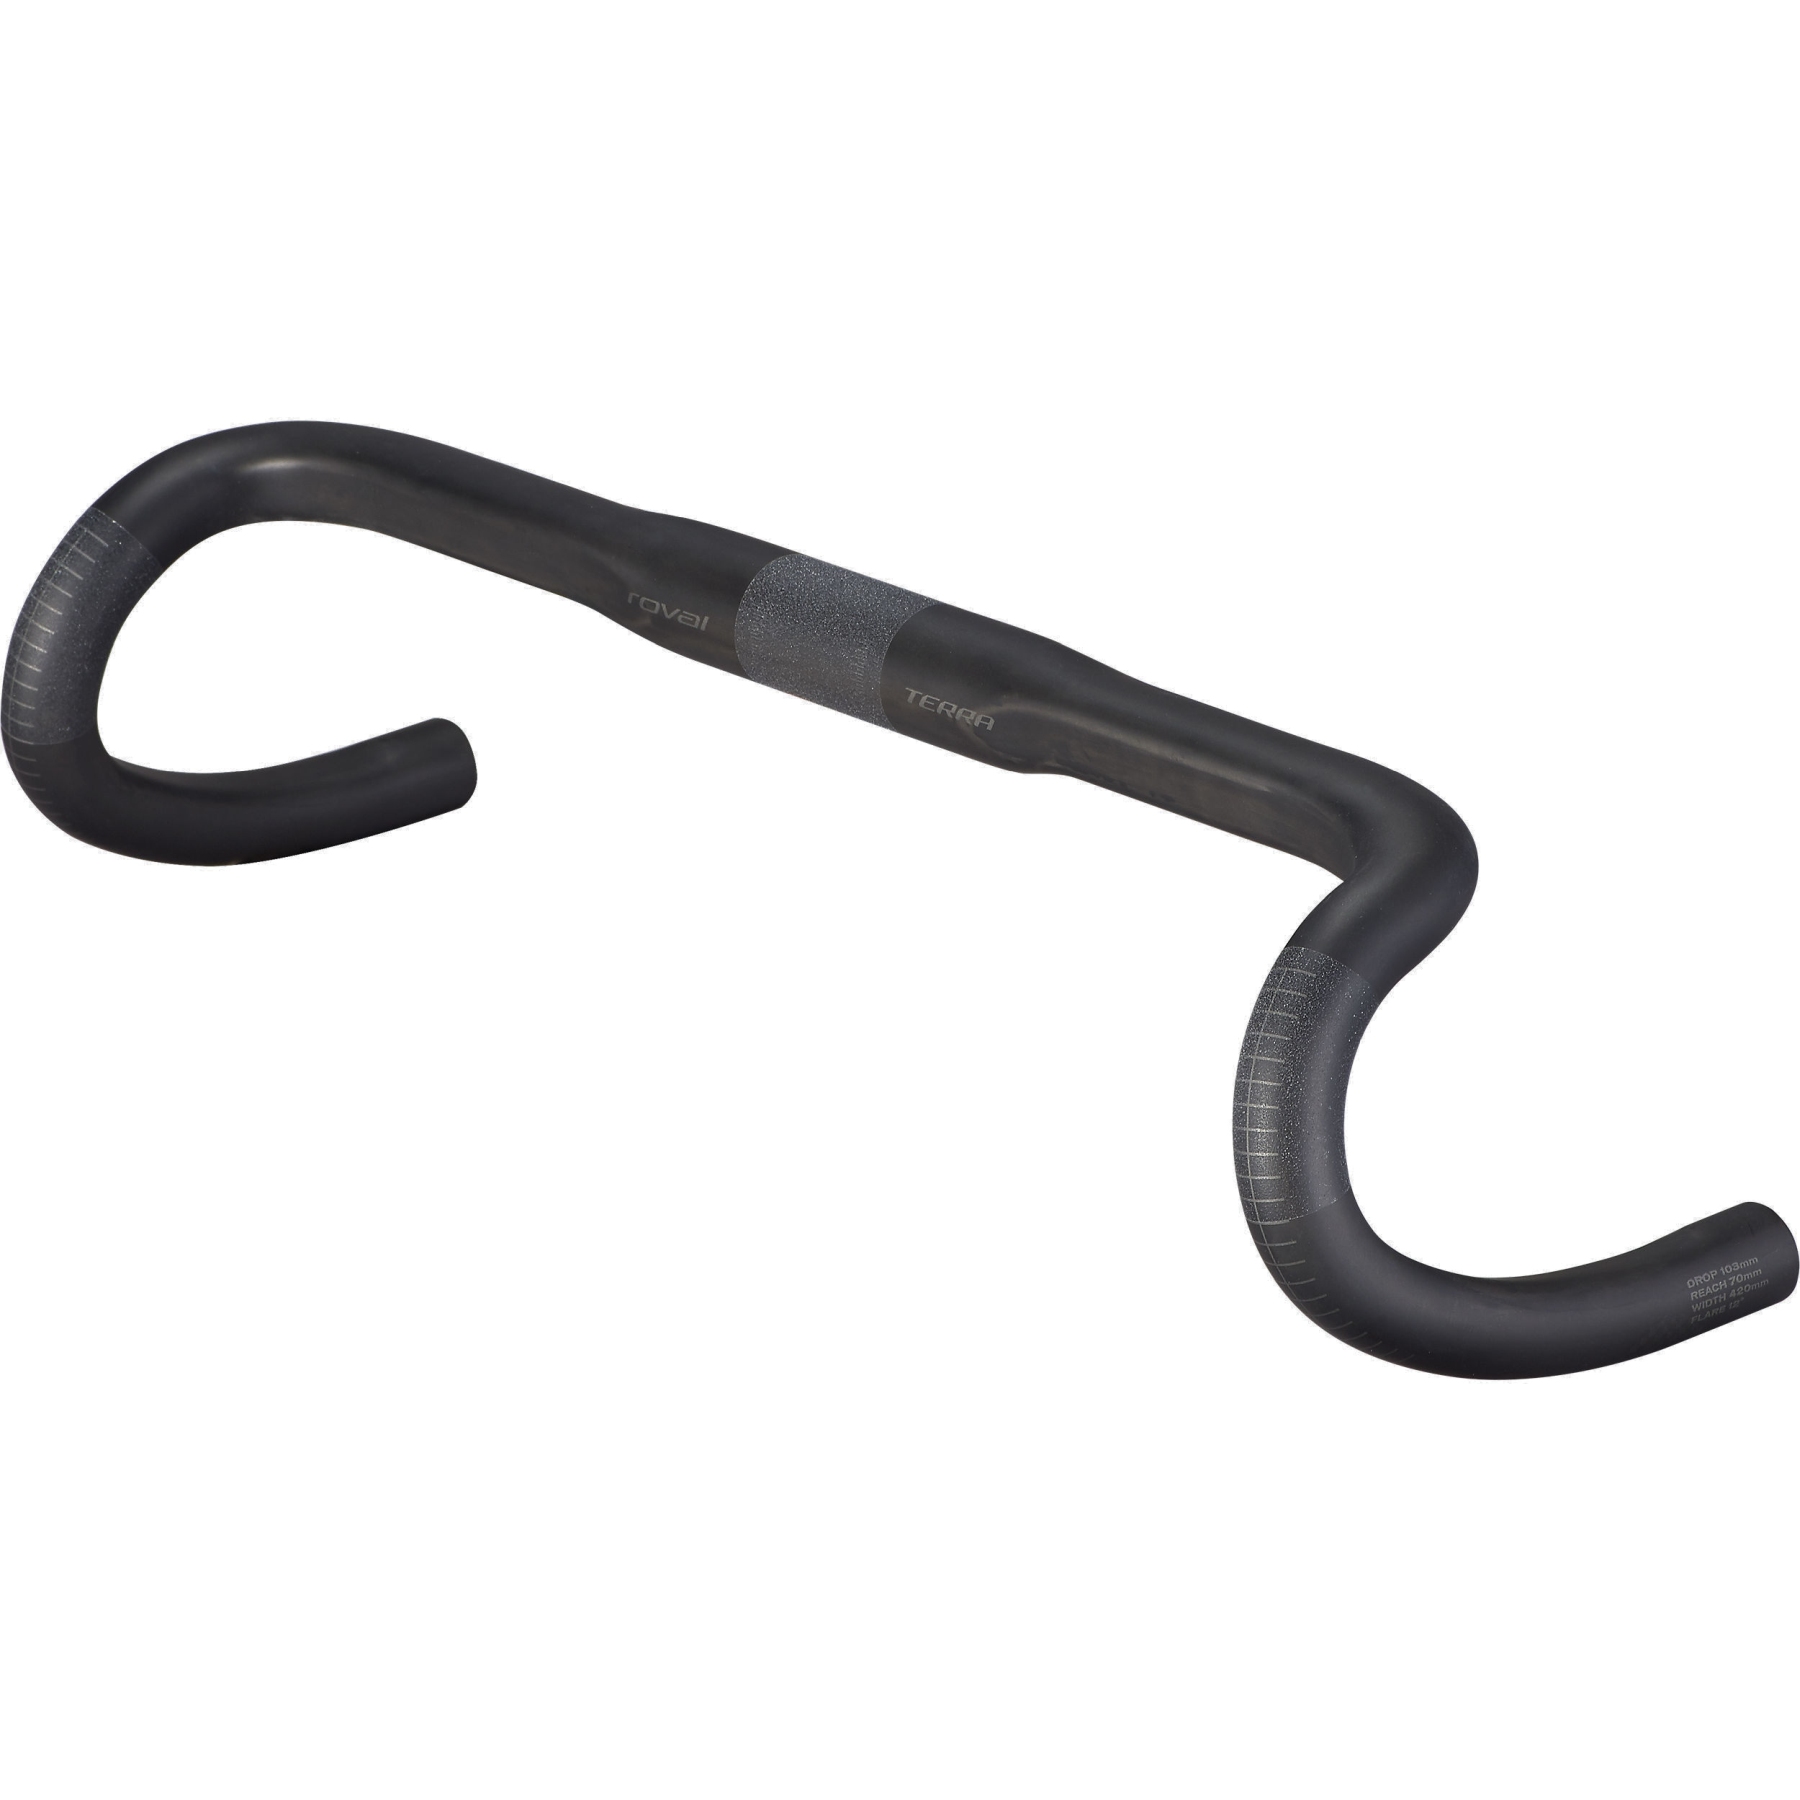 Picture of Specialized Roval Terra Road Handlebar 31.8 - Black/Charcoal